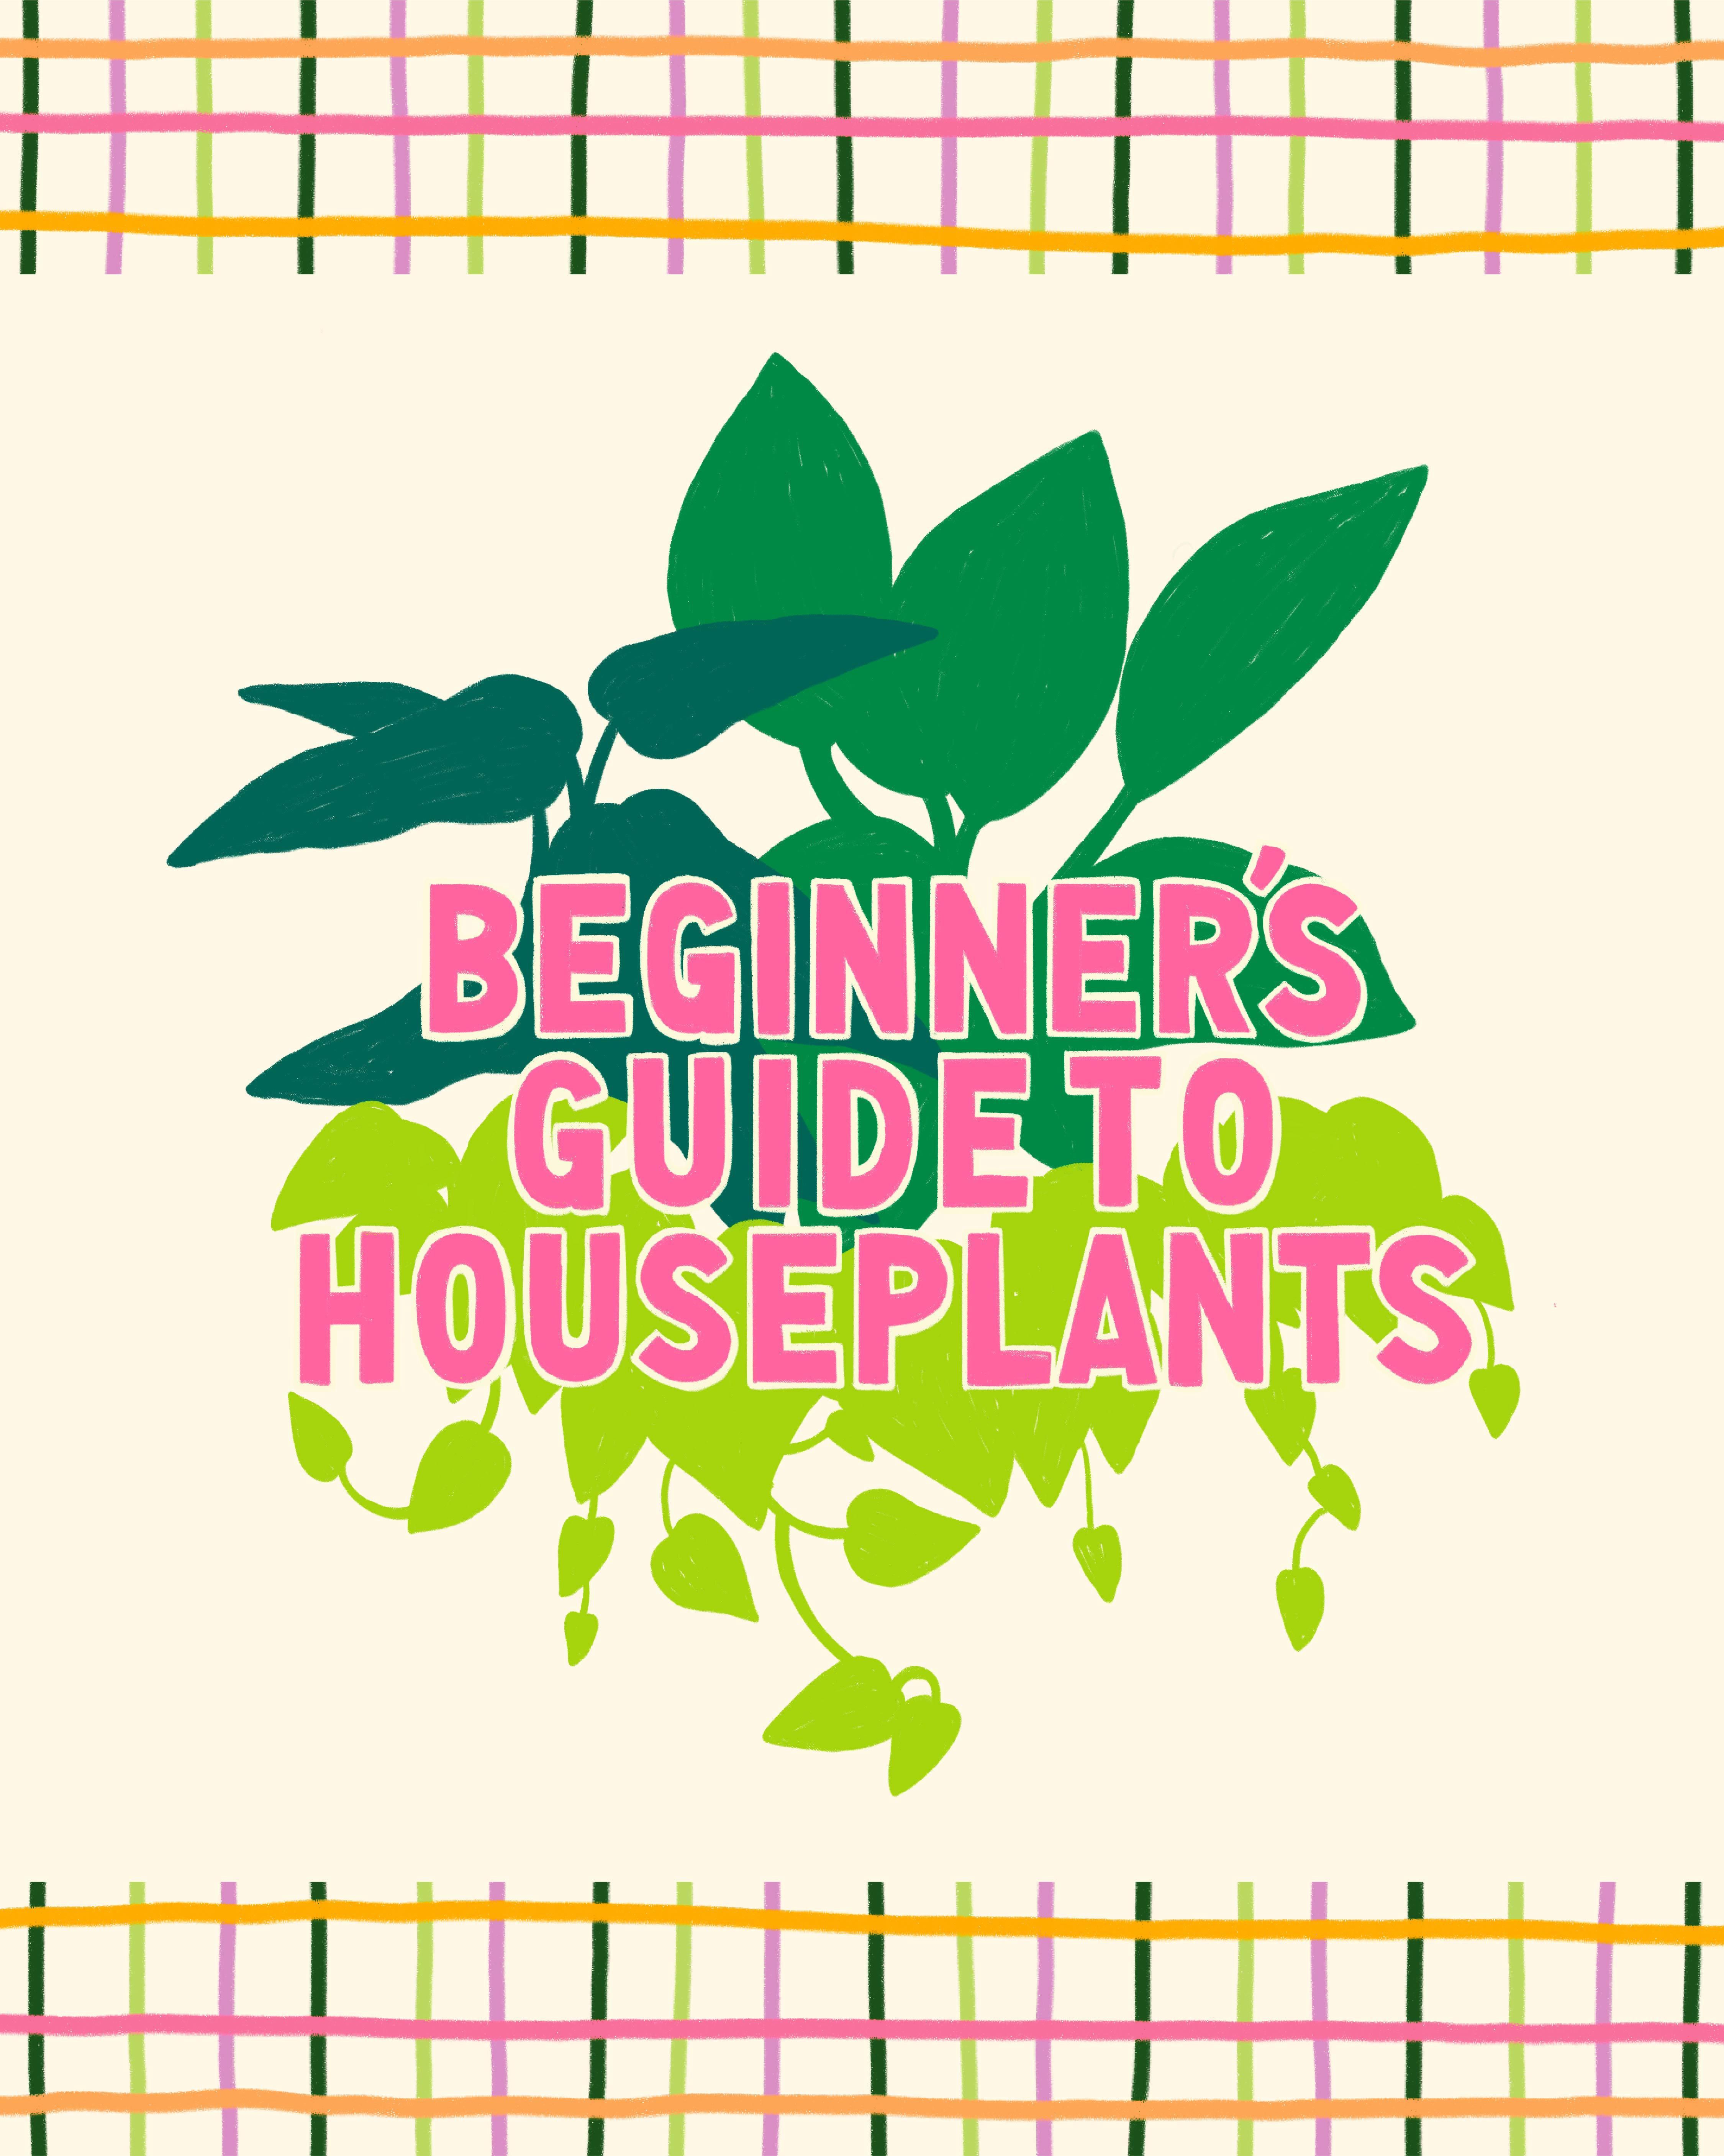 the beginner's guide to houseplants